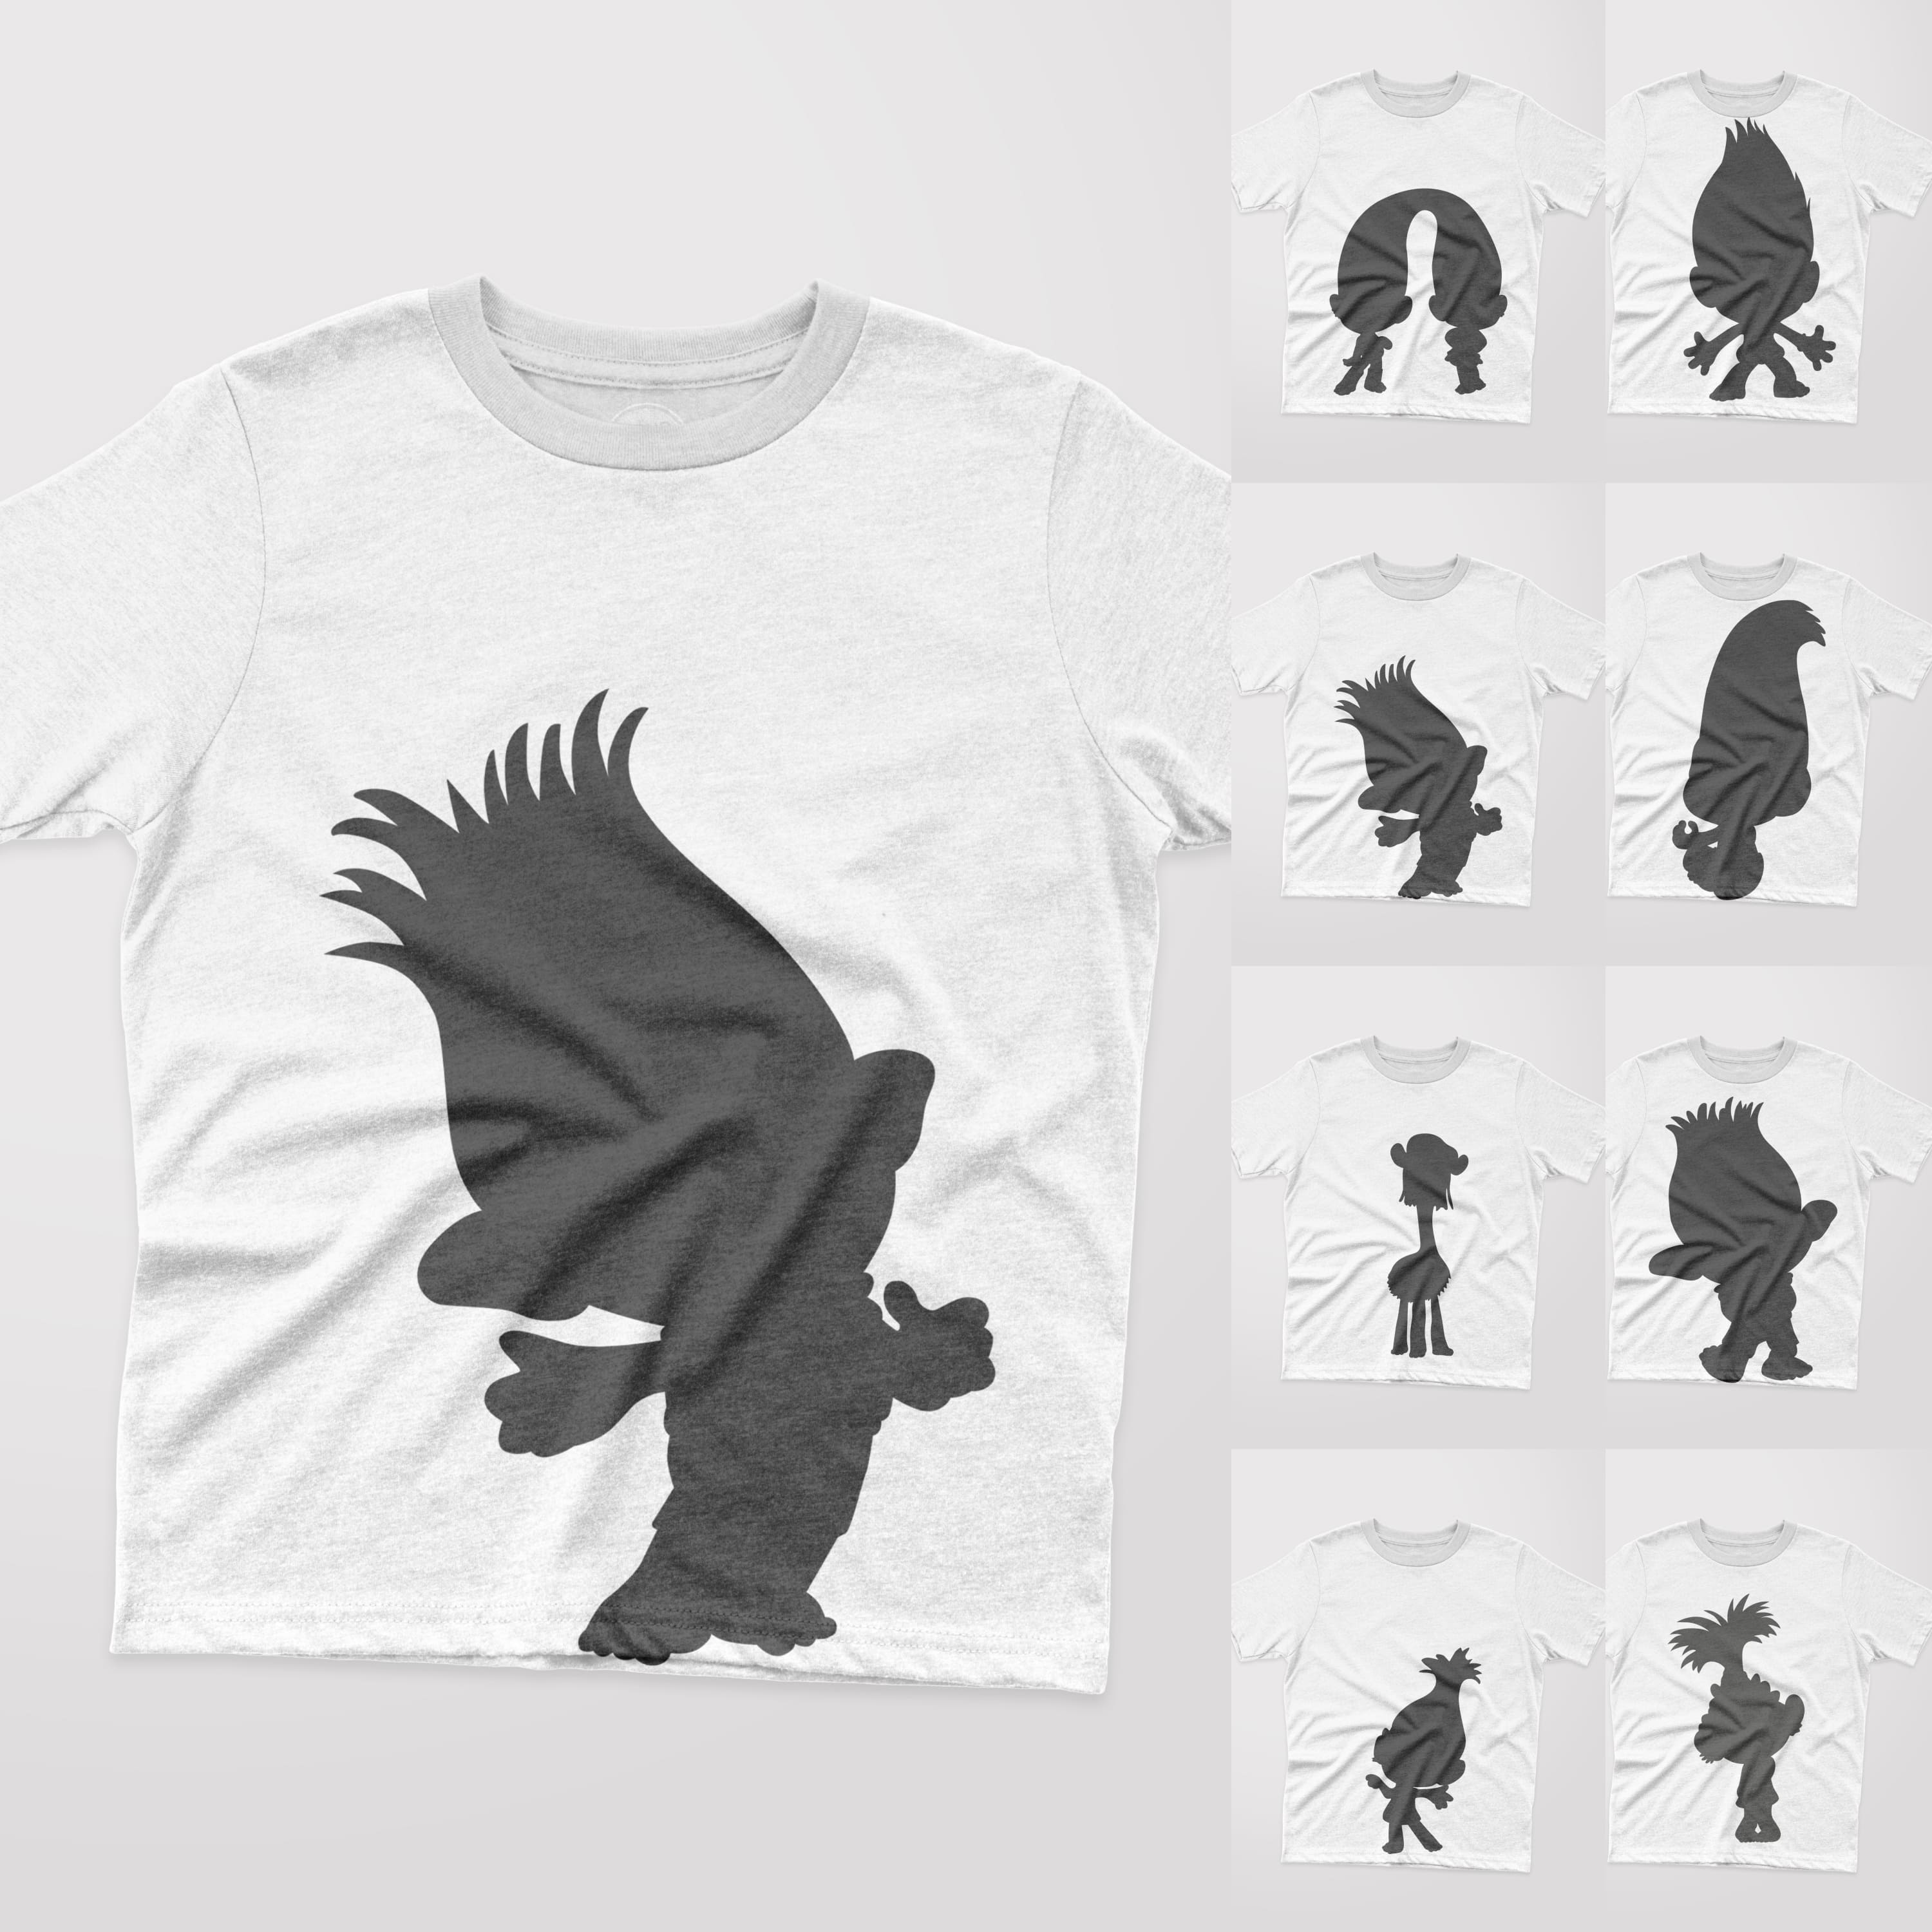 Preview 8 Troll Silhouette T-shirt Designs Cover.